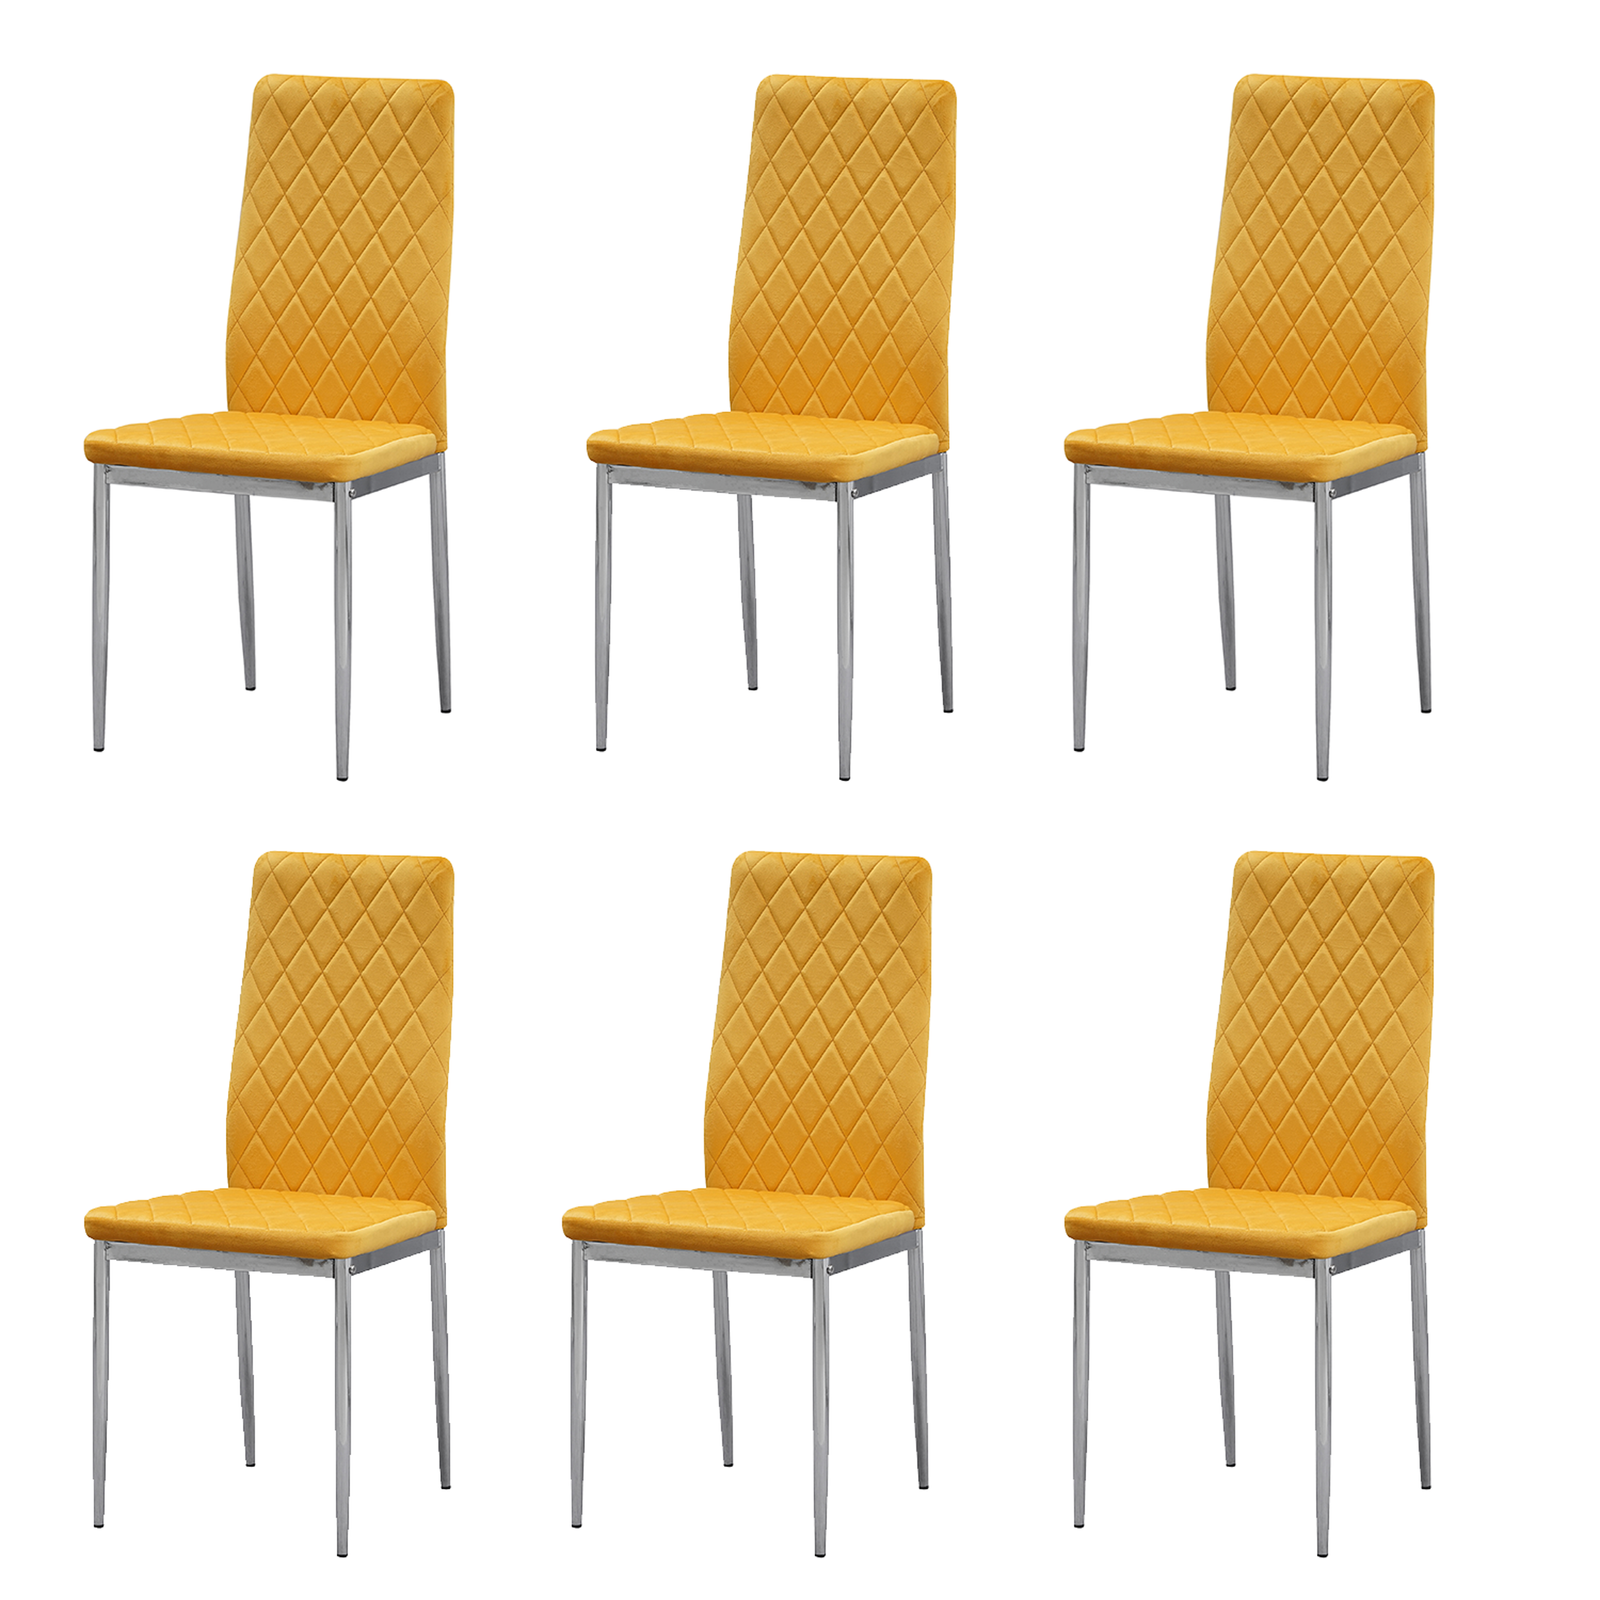 Allie Gold Chairs - Set of 6